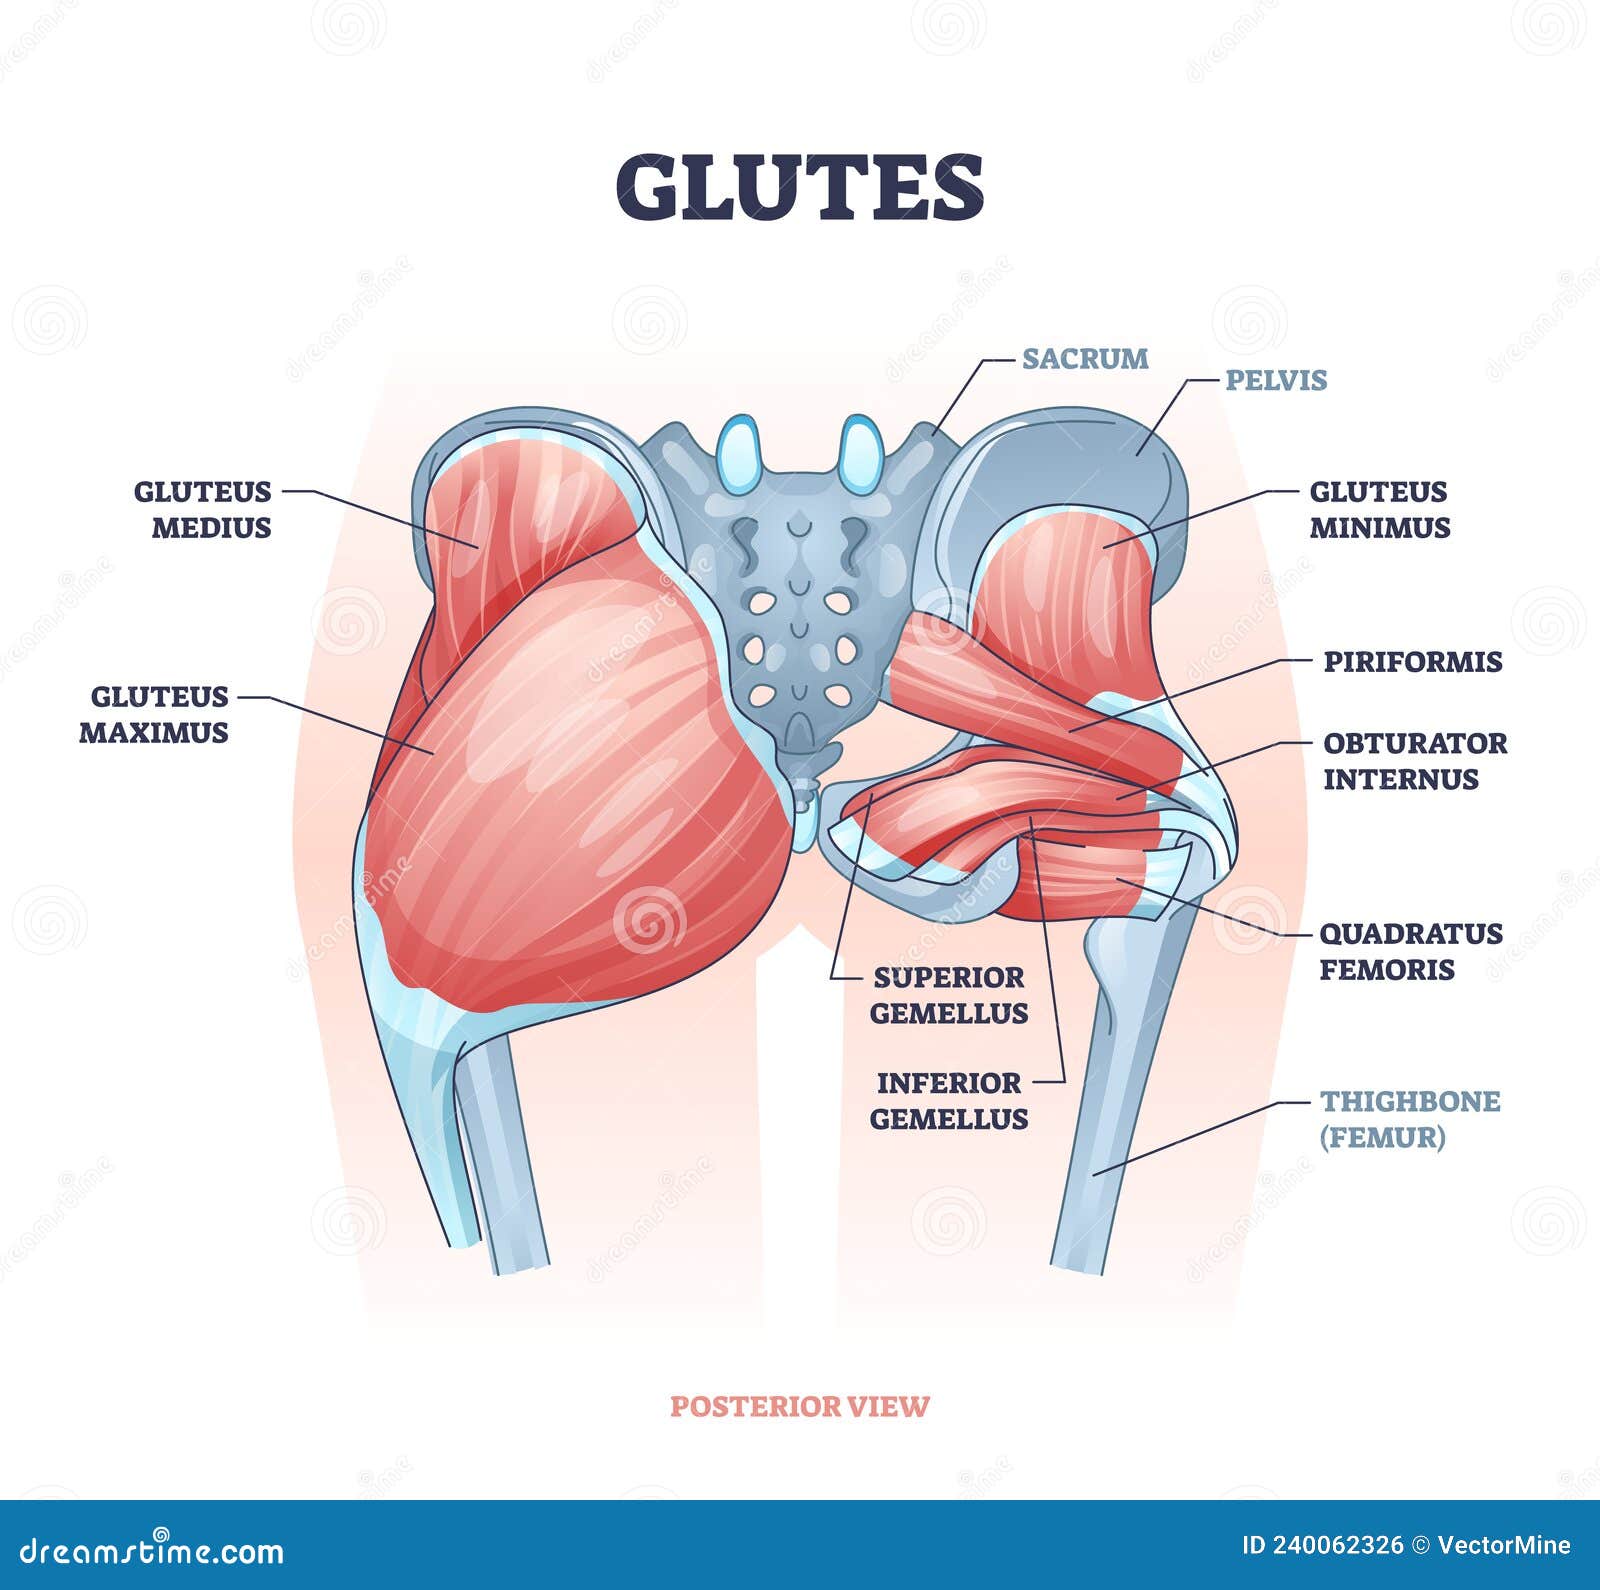 glutes as gluteal body muscles for human buttocks strength outline concept